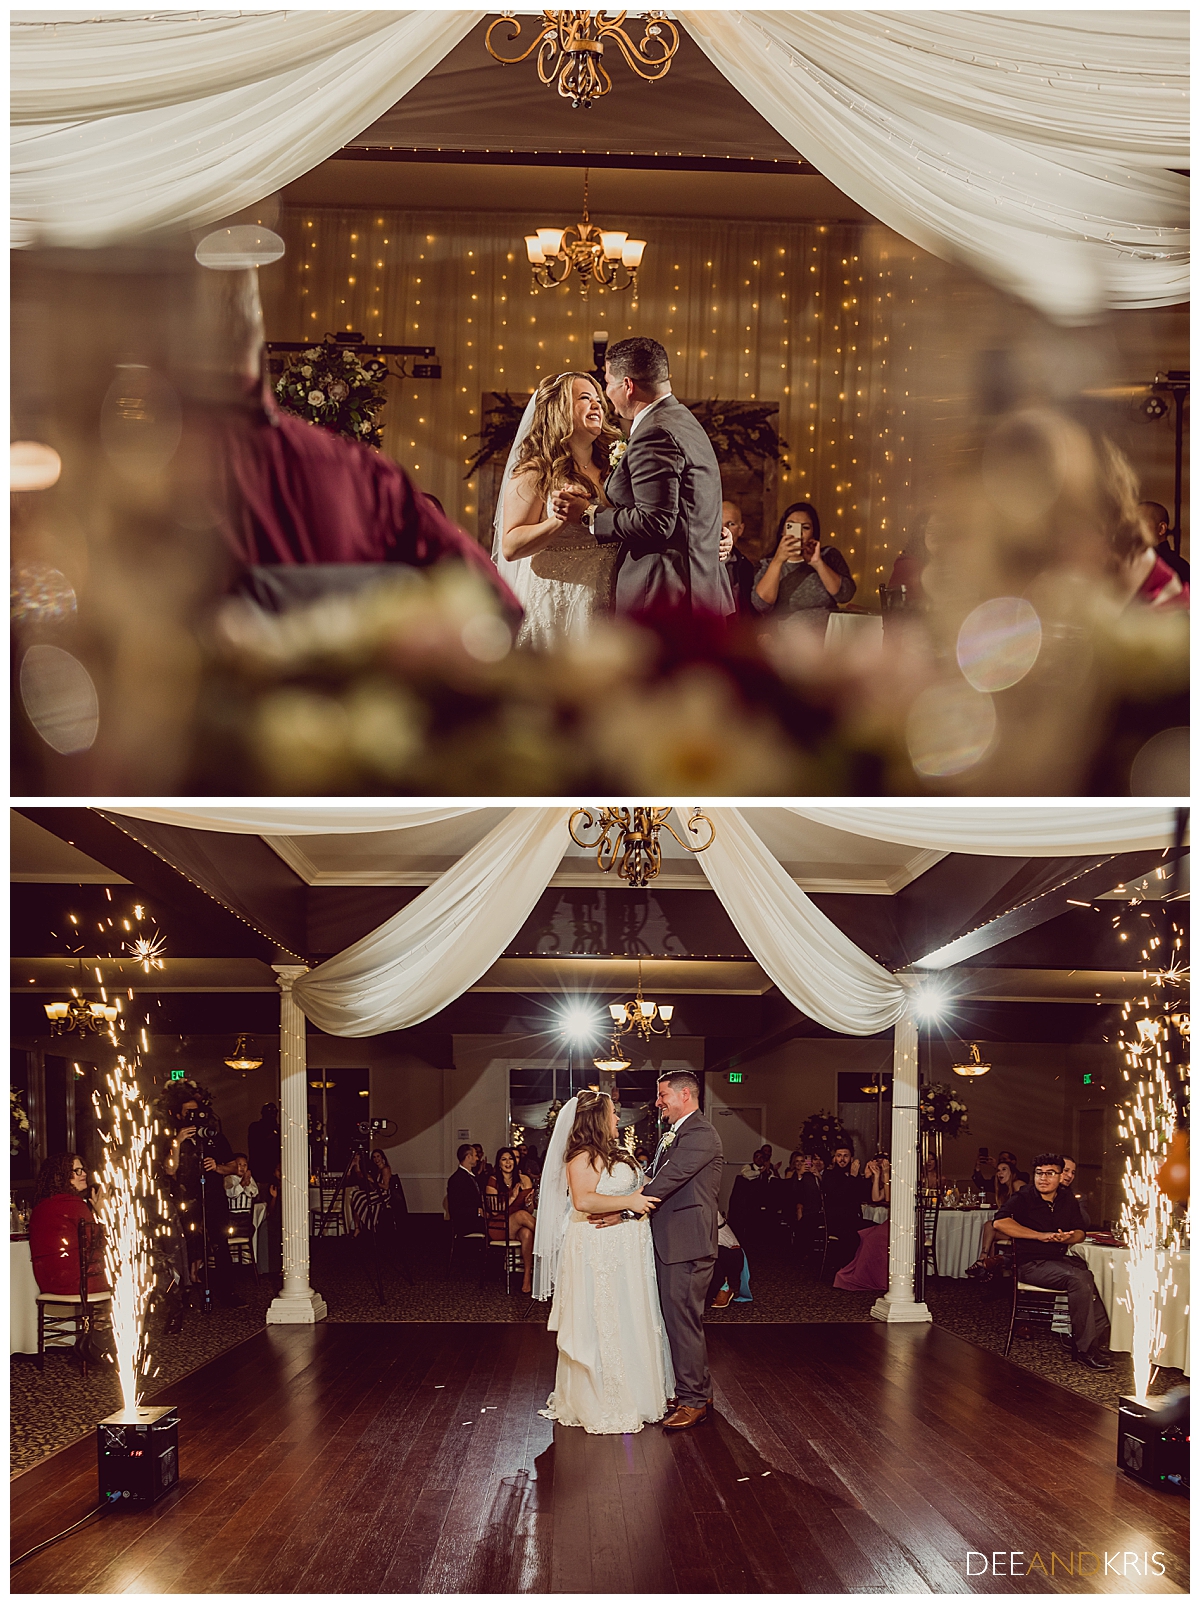 Two color images: top image of POV view from behind wine glasses watching bride and groom dance. Bottom image full shot bride and groom dancing with pyrotechnics on either side.